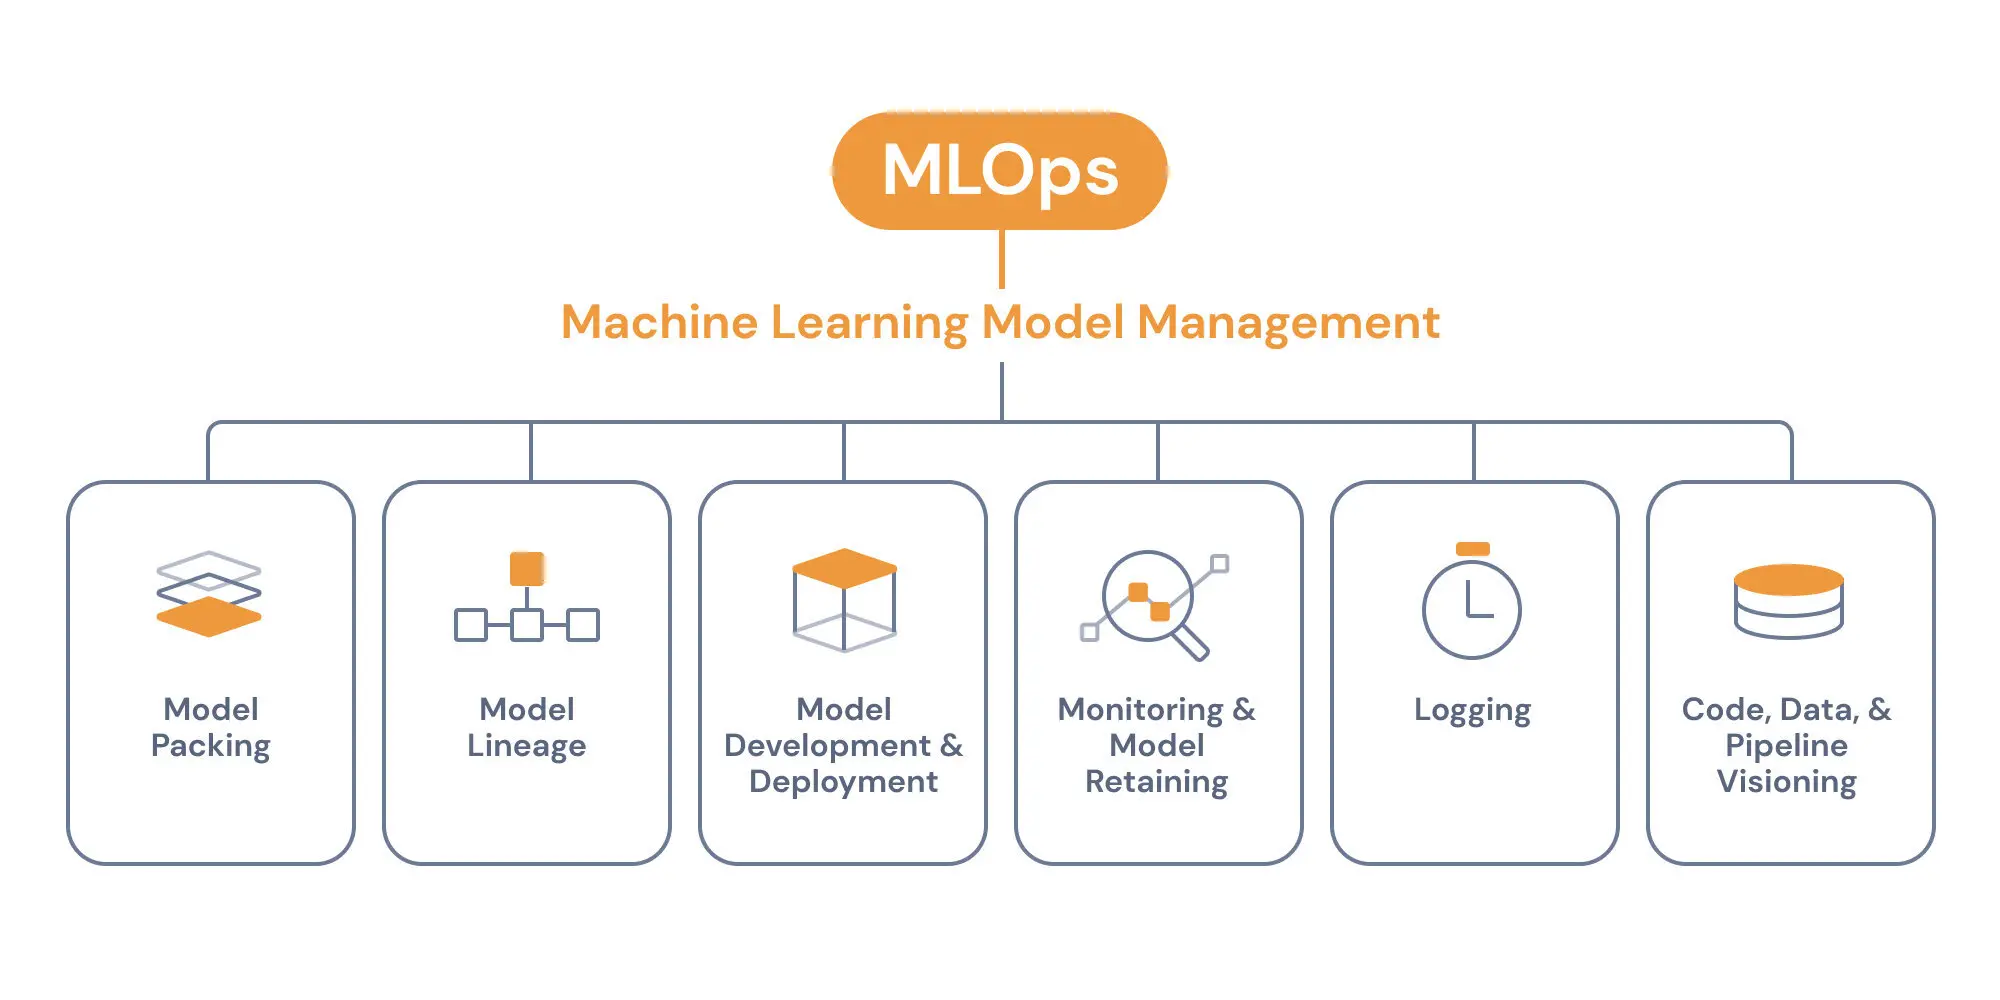 What is Machine Learning Model Management?